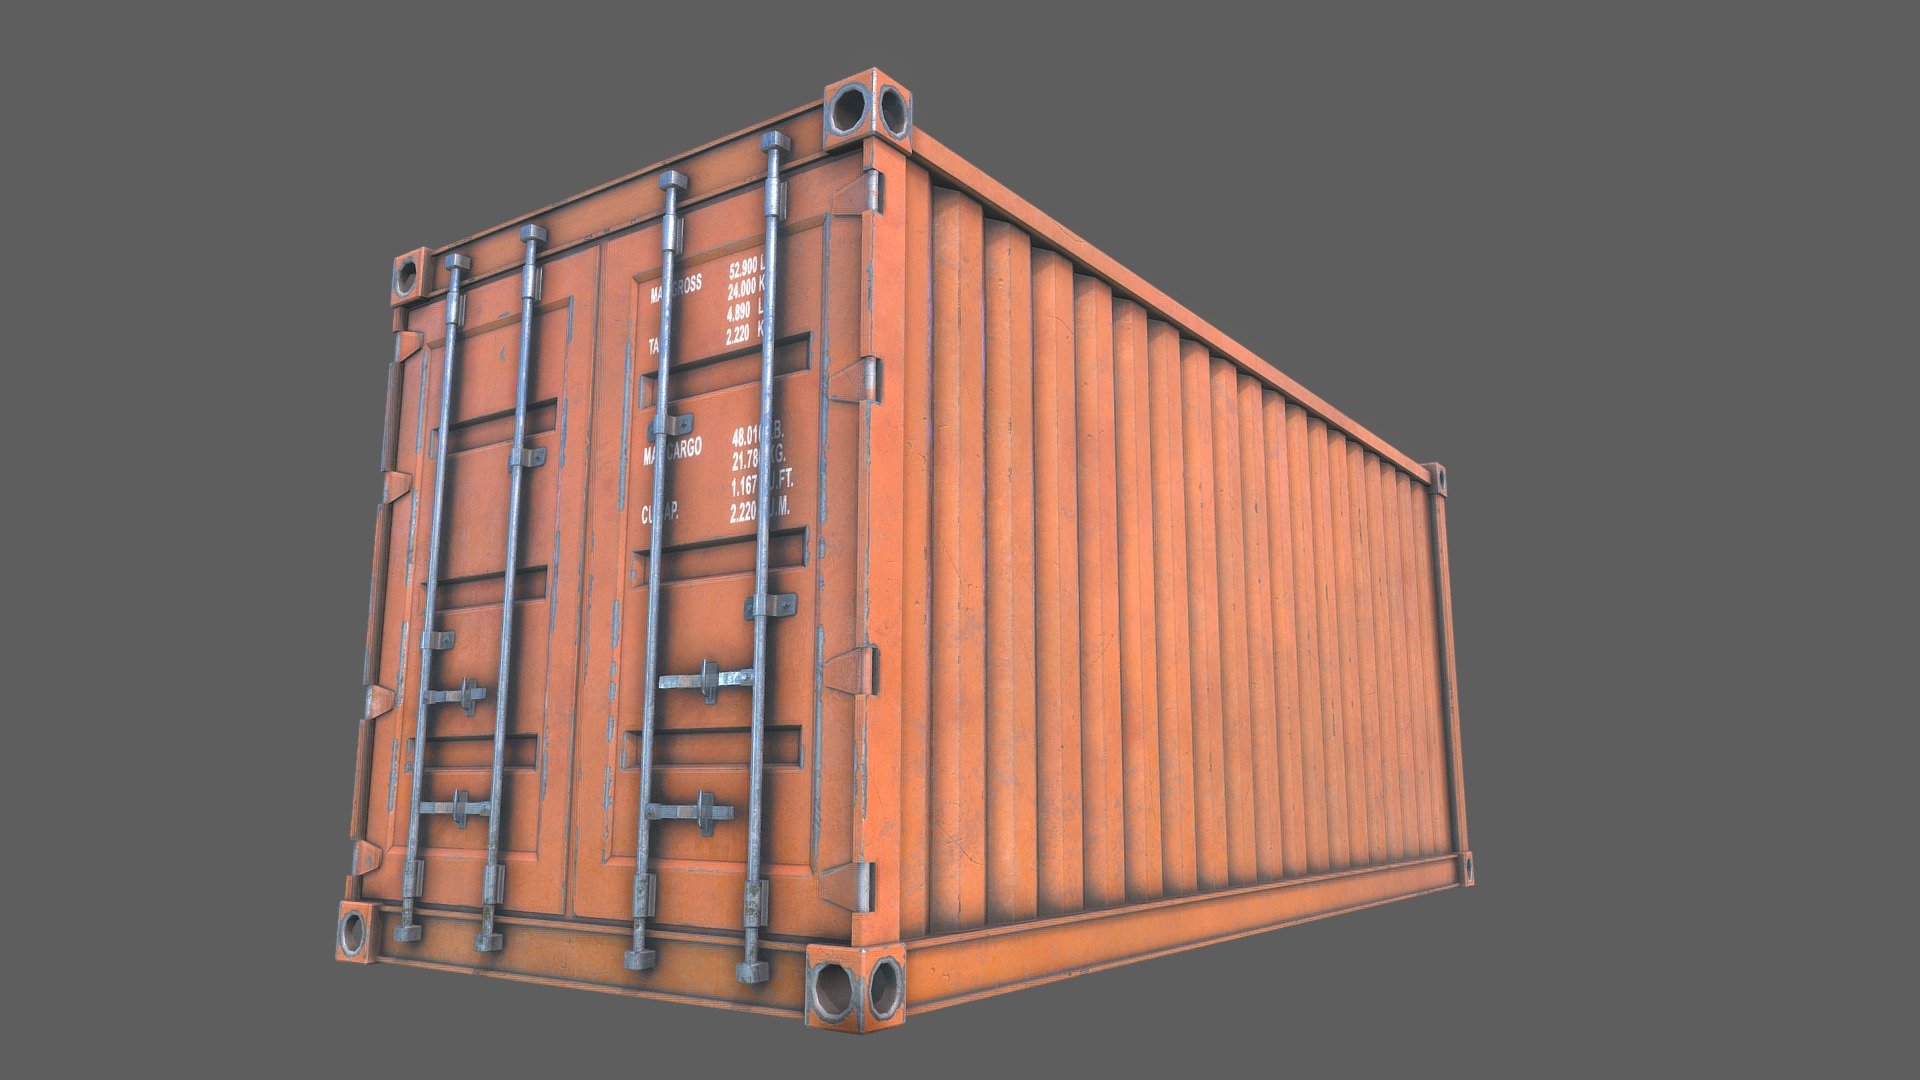 Cargo Container Orange PBR




Cargo Container PBR

High Quality Low Poly Cargo Container with Metal PBR Texturing, 
and alot of Details to its mesh

Fits perfect for any PBR game as Decoration in Exterior Level Design.




Unreal Engine 4 Textures Included
Base Color
Normal
OcclusionRoughnessMetallic




Unity 5 Textures Included
AlbedoTransparency
Normal
AO
SpecularSmoothness




Default Textures Included
Base Color
Normal
Height
Roughness
Metallic
Opacity




File Formats included :
.Max2018
.Max2017
.Max2016
.Max2015
.OBJ
.FBX
.3DS
.DAE - Cargo Container Orange PBR - Buy Royalty Free 3D model by GamePoly (@triix3d) 3d model